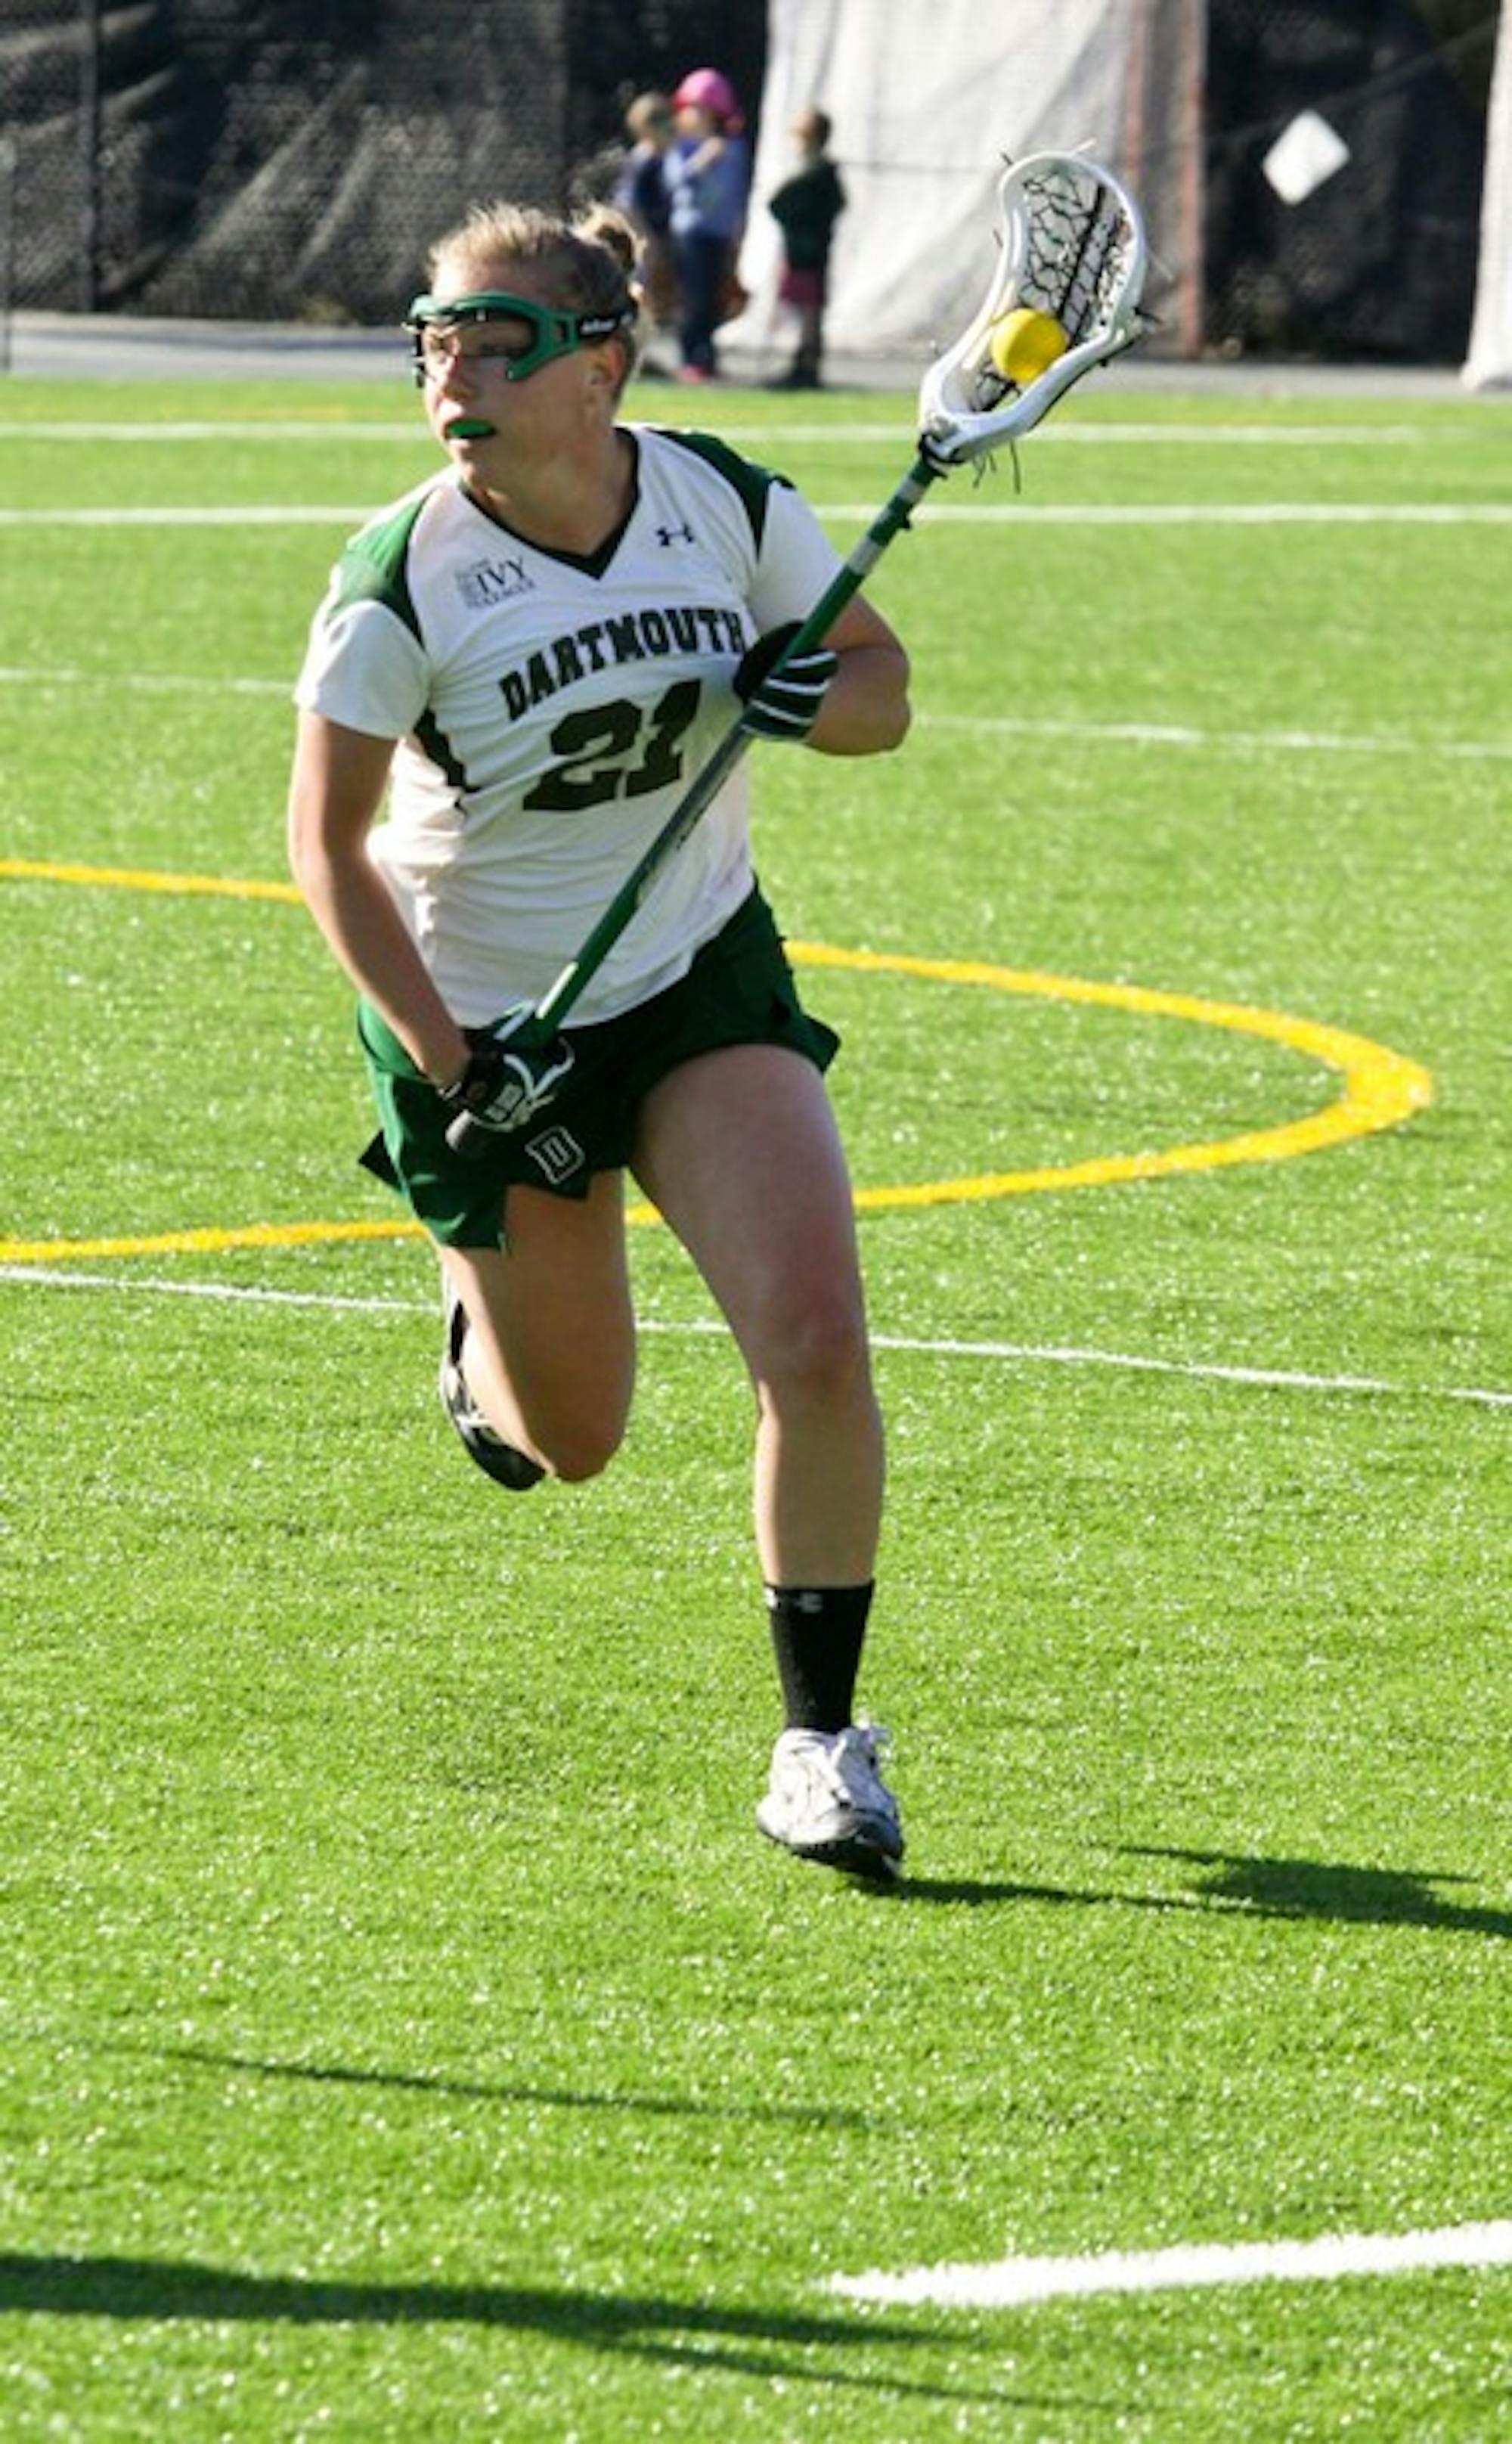 Big Green defender Kelly Hopley '11 had one turnover in Dartmouth's 14-4 loss against Princeton Saturday.